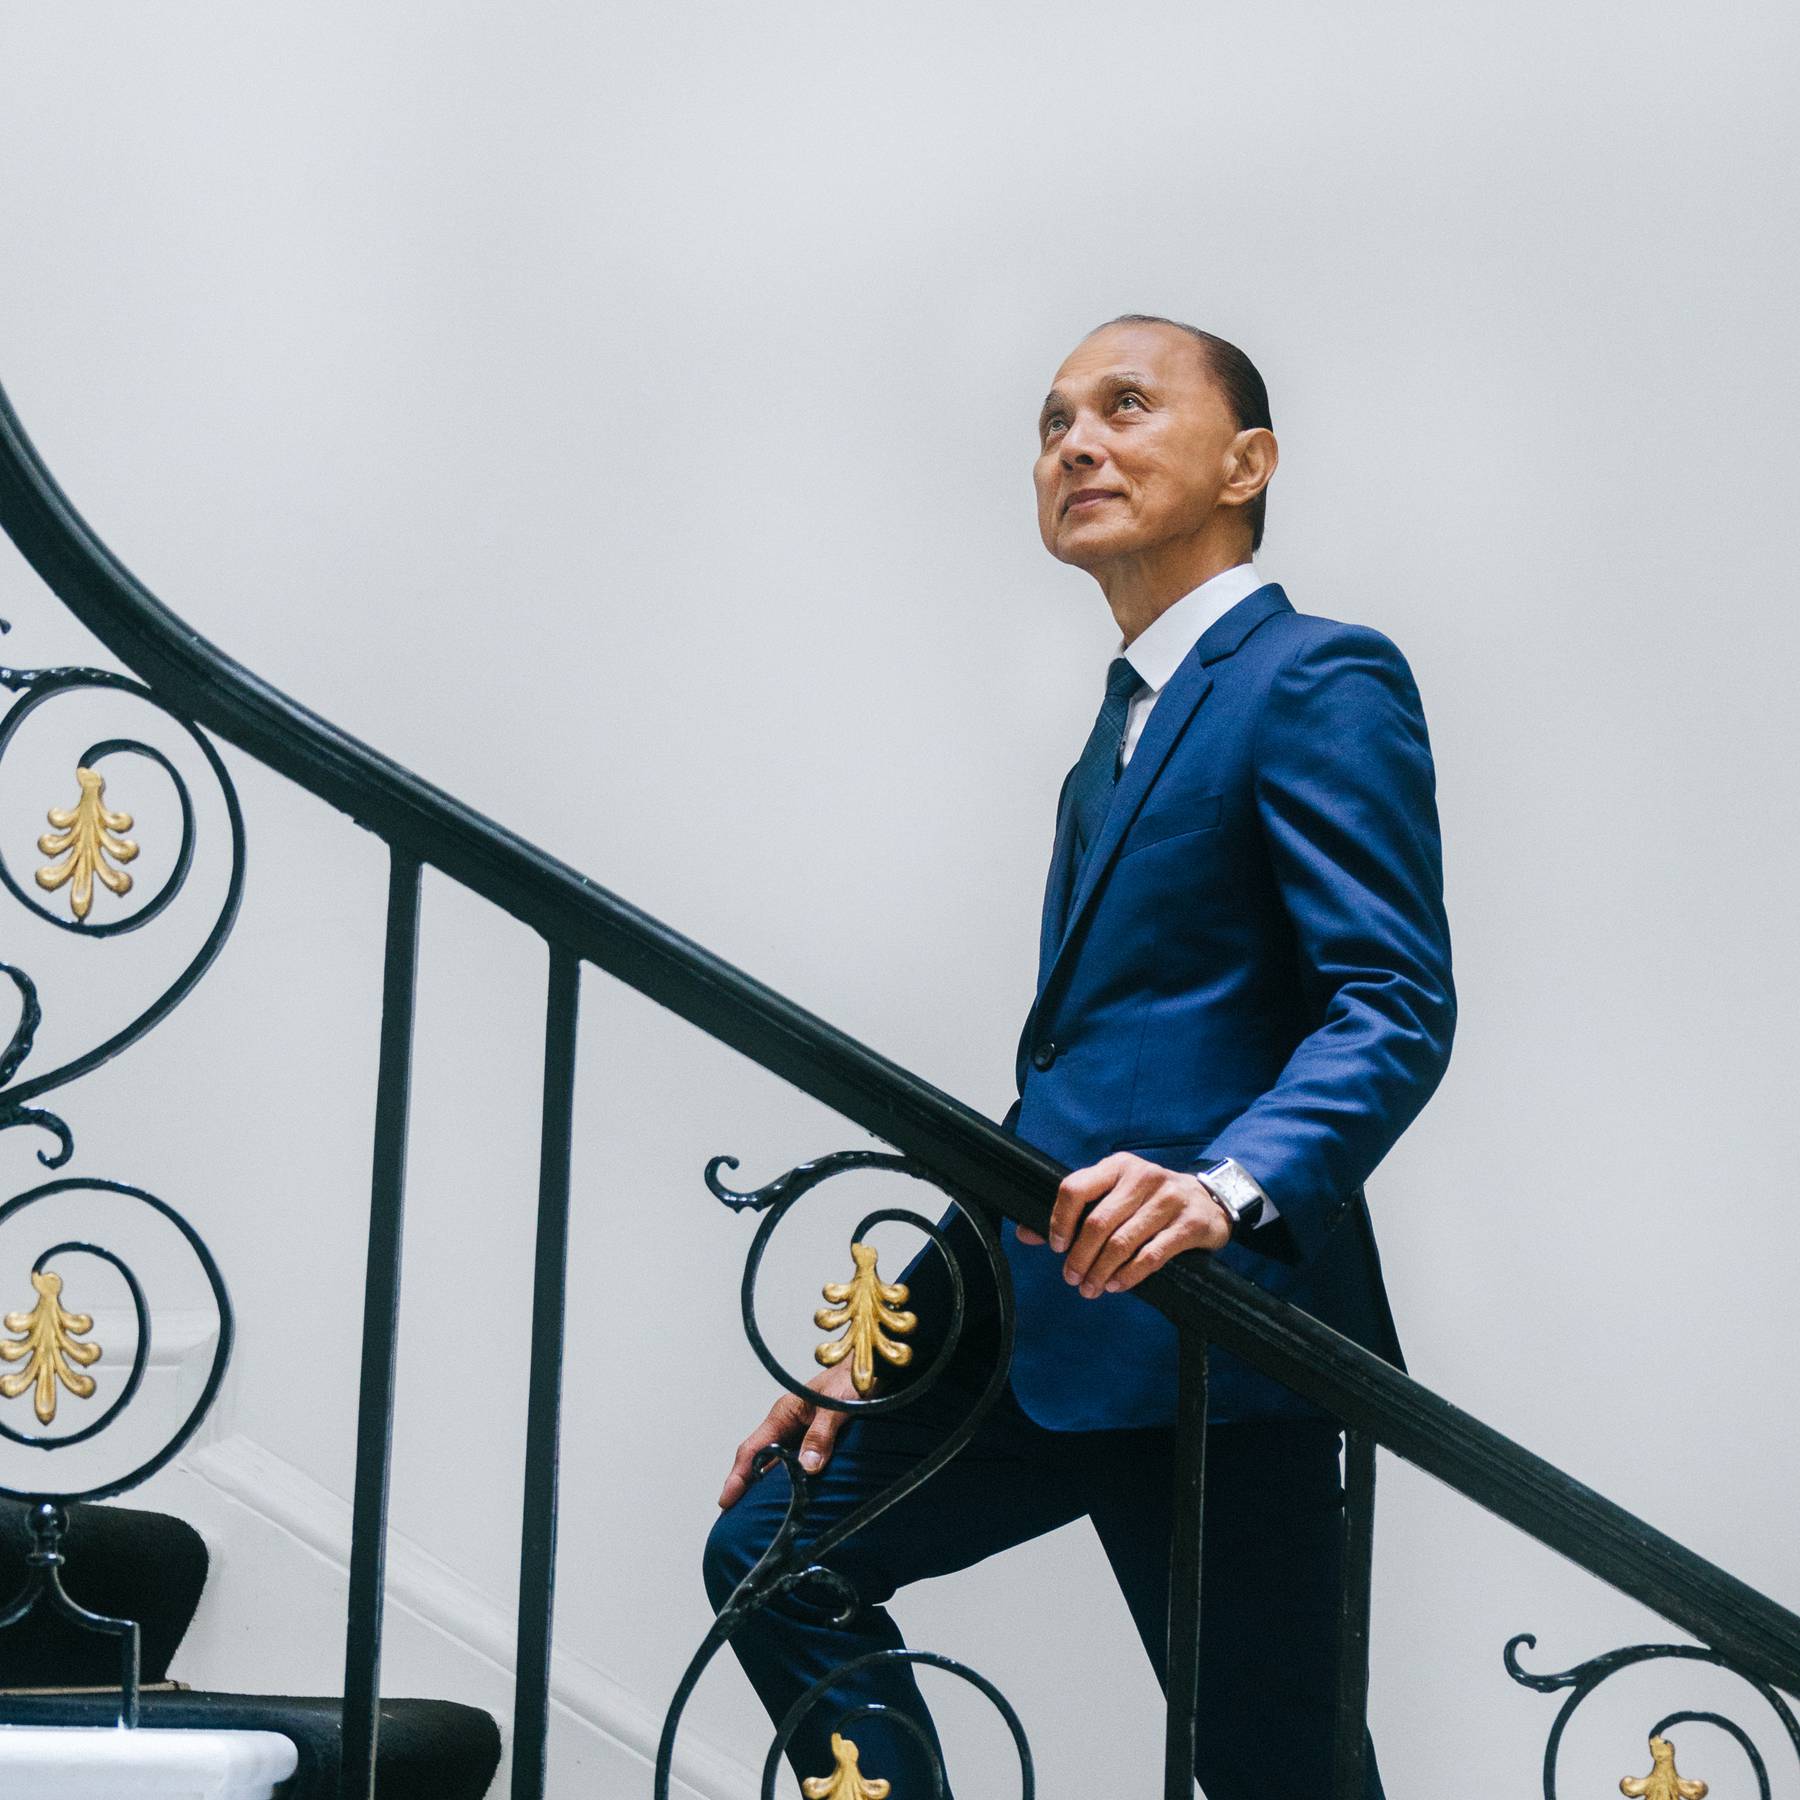 6 Lessons To Learn From Shoe Designer Jimmy Choo